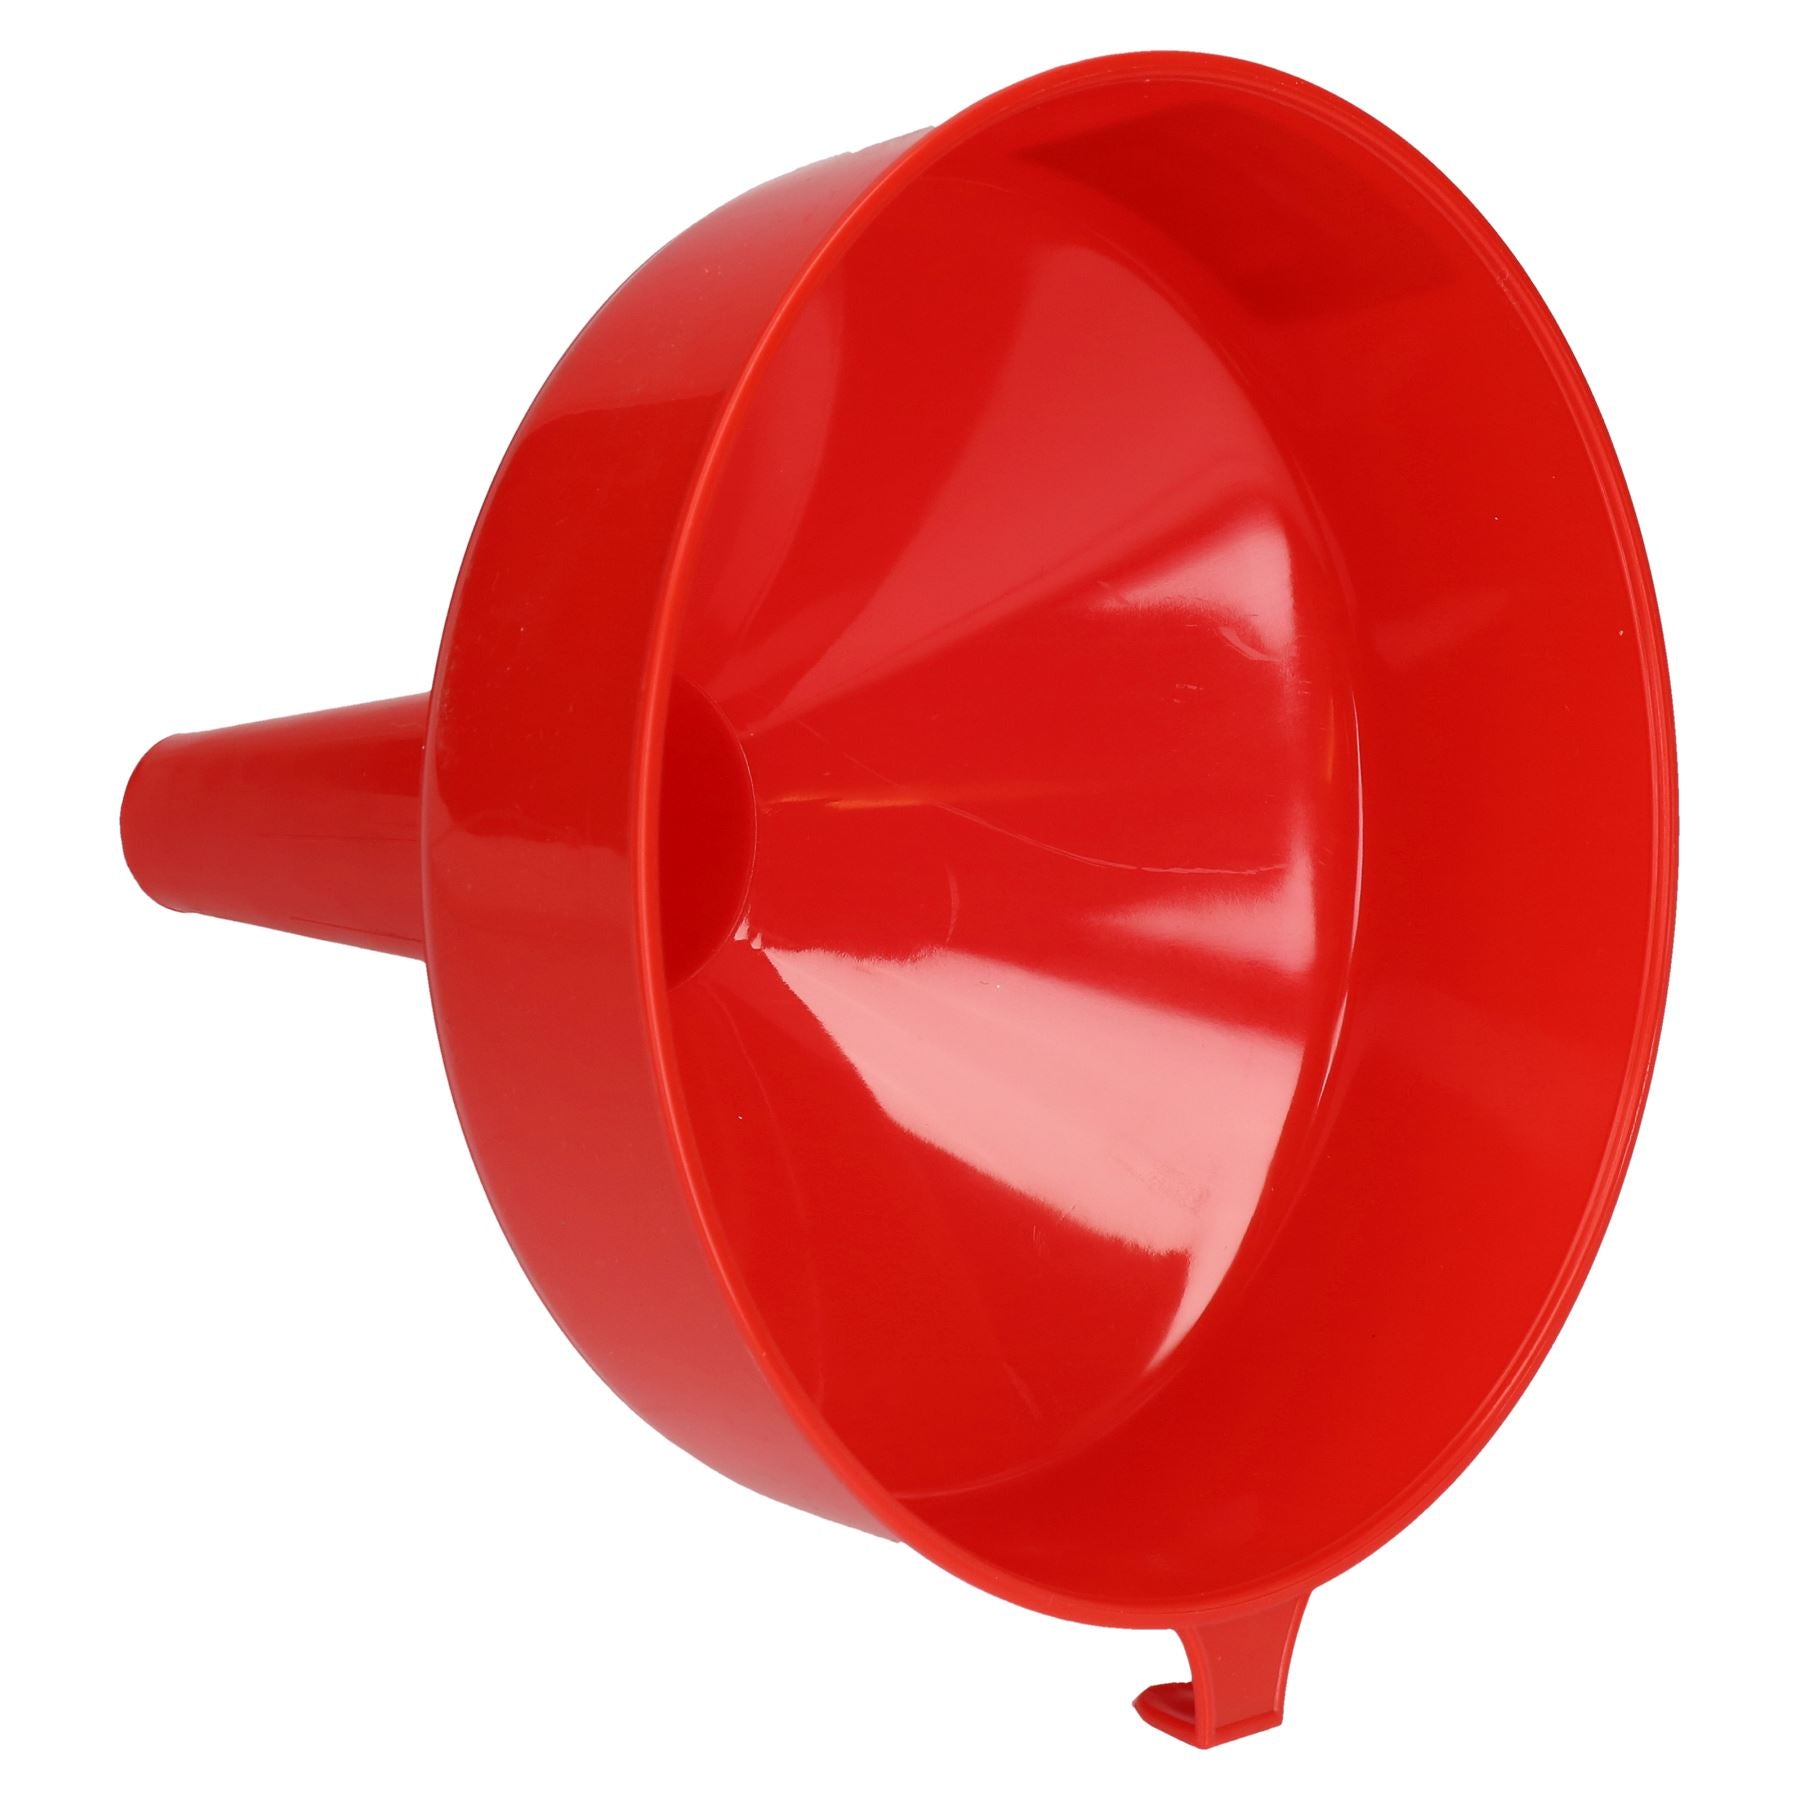 8" Wide Plastic Fuel Funnel With Fixed Spout Suitable For Petrol Diesel Water Oil